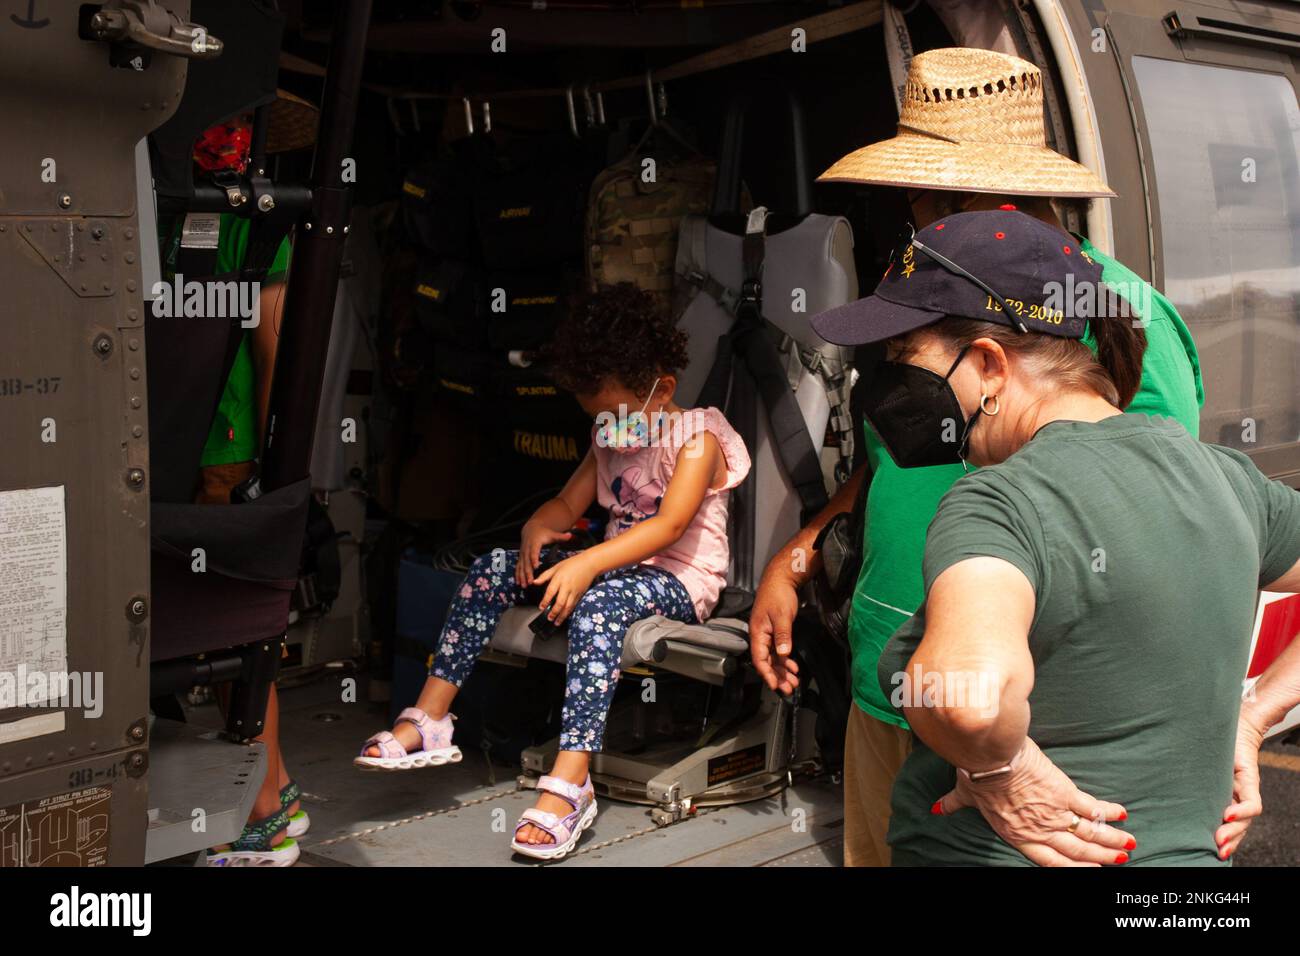 A child sits in a Sikorsky HH-60M MEDEVAC Black Hawk Helicopter during the 2022 Kaneohe Bay Air Show, Marine Corps Air Station Kaneohe Bay, Marine Corps Base Hawaii, Aug. 14, 2022. The air show provided an opportunity for MCBH to foster positive relationships with the local community, while providing a unique experience to the public. The Kaneohe Bay Air Show, which contained aerial performances, static displays, demonstrations and vendors, was designed to celebrate MCBH’s longstanding relationship with the local community. Stock Photo